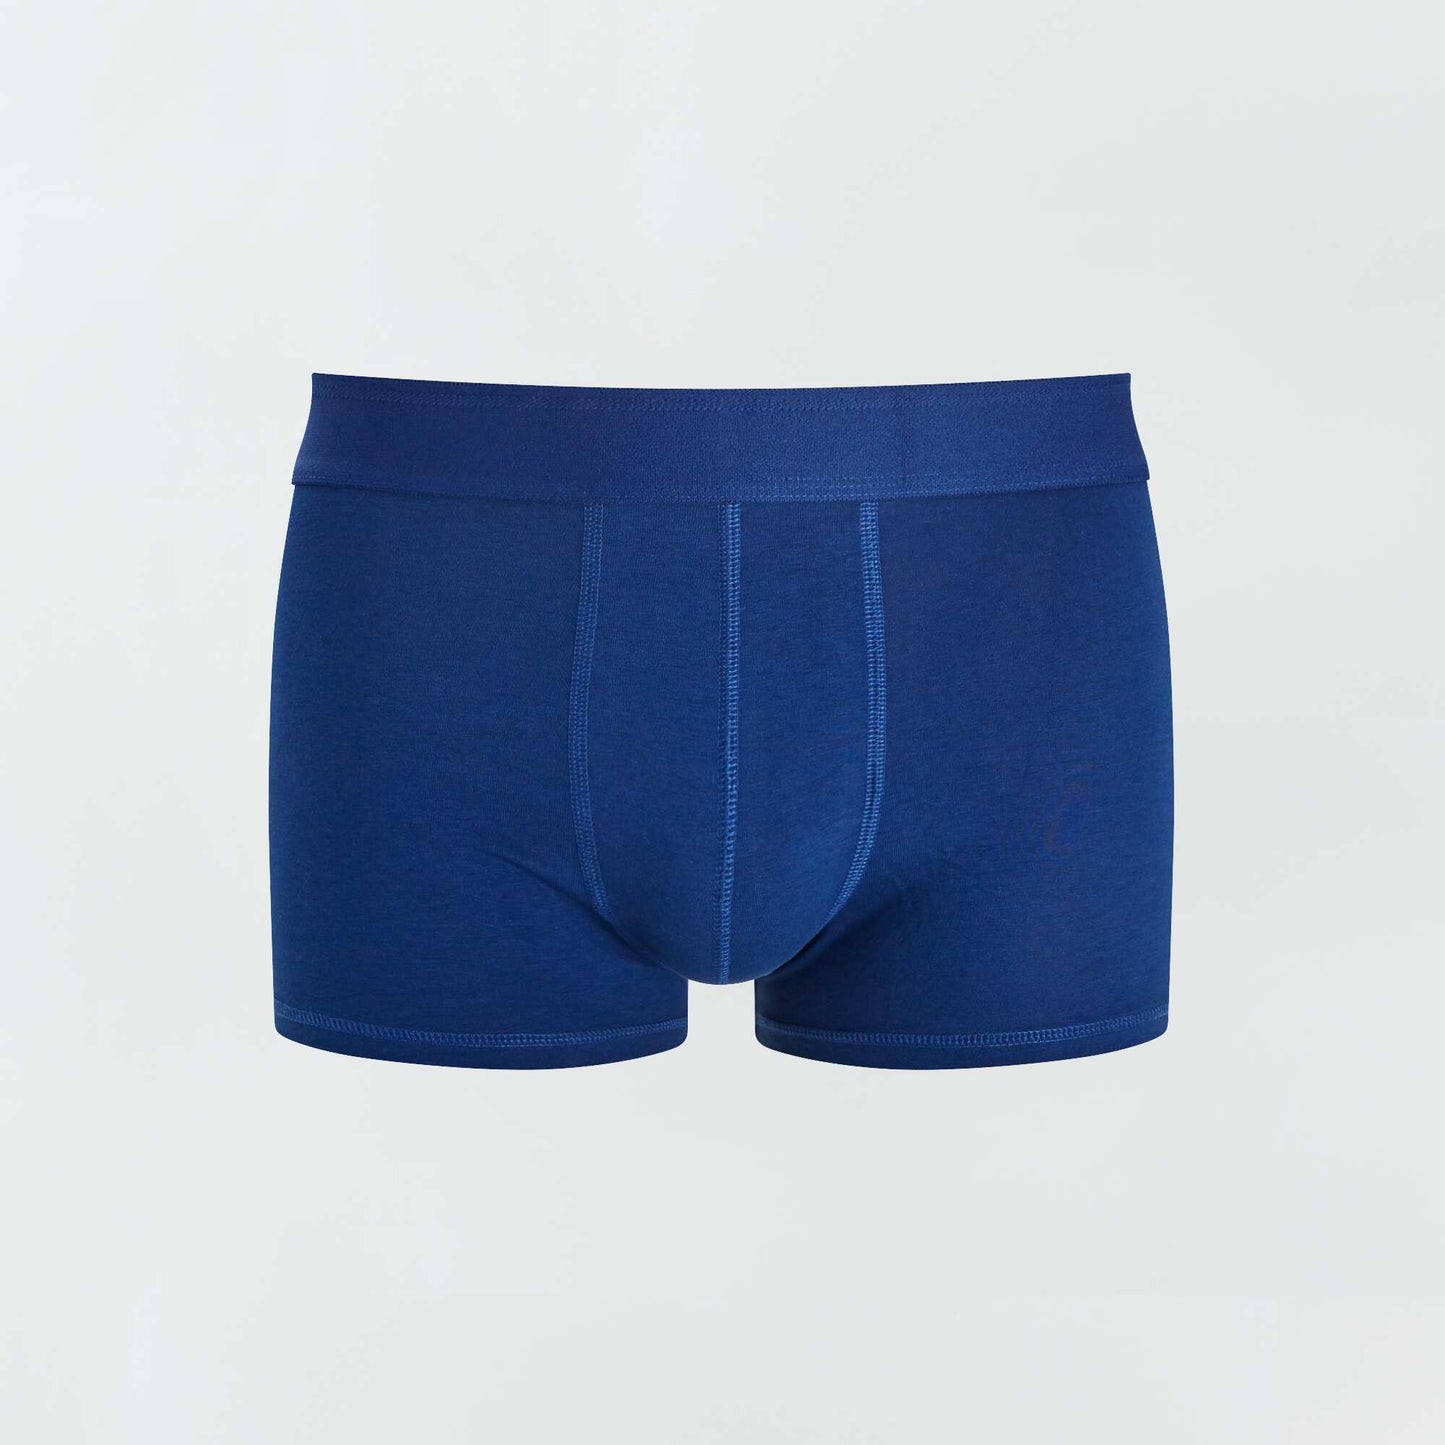 Pack of 3 plain boxers BLUE/grey/red